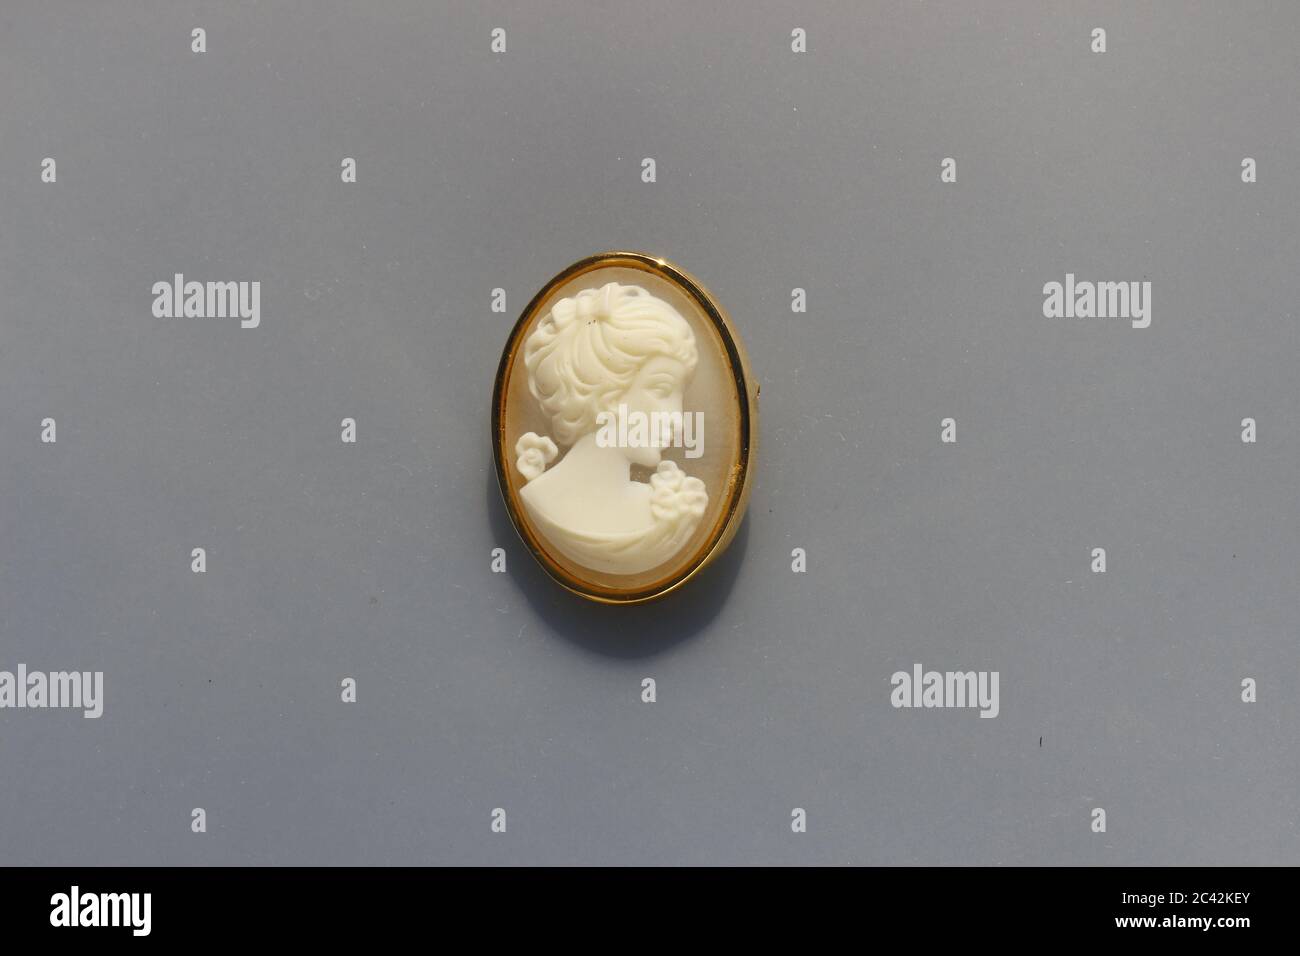 Vintage cameo style brooch costume jewelry Stock Photo - Alamy